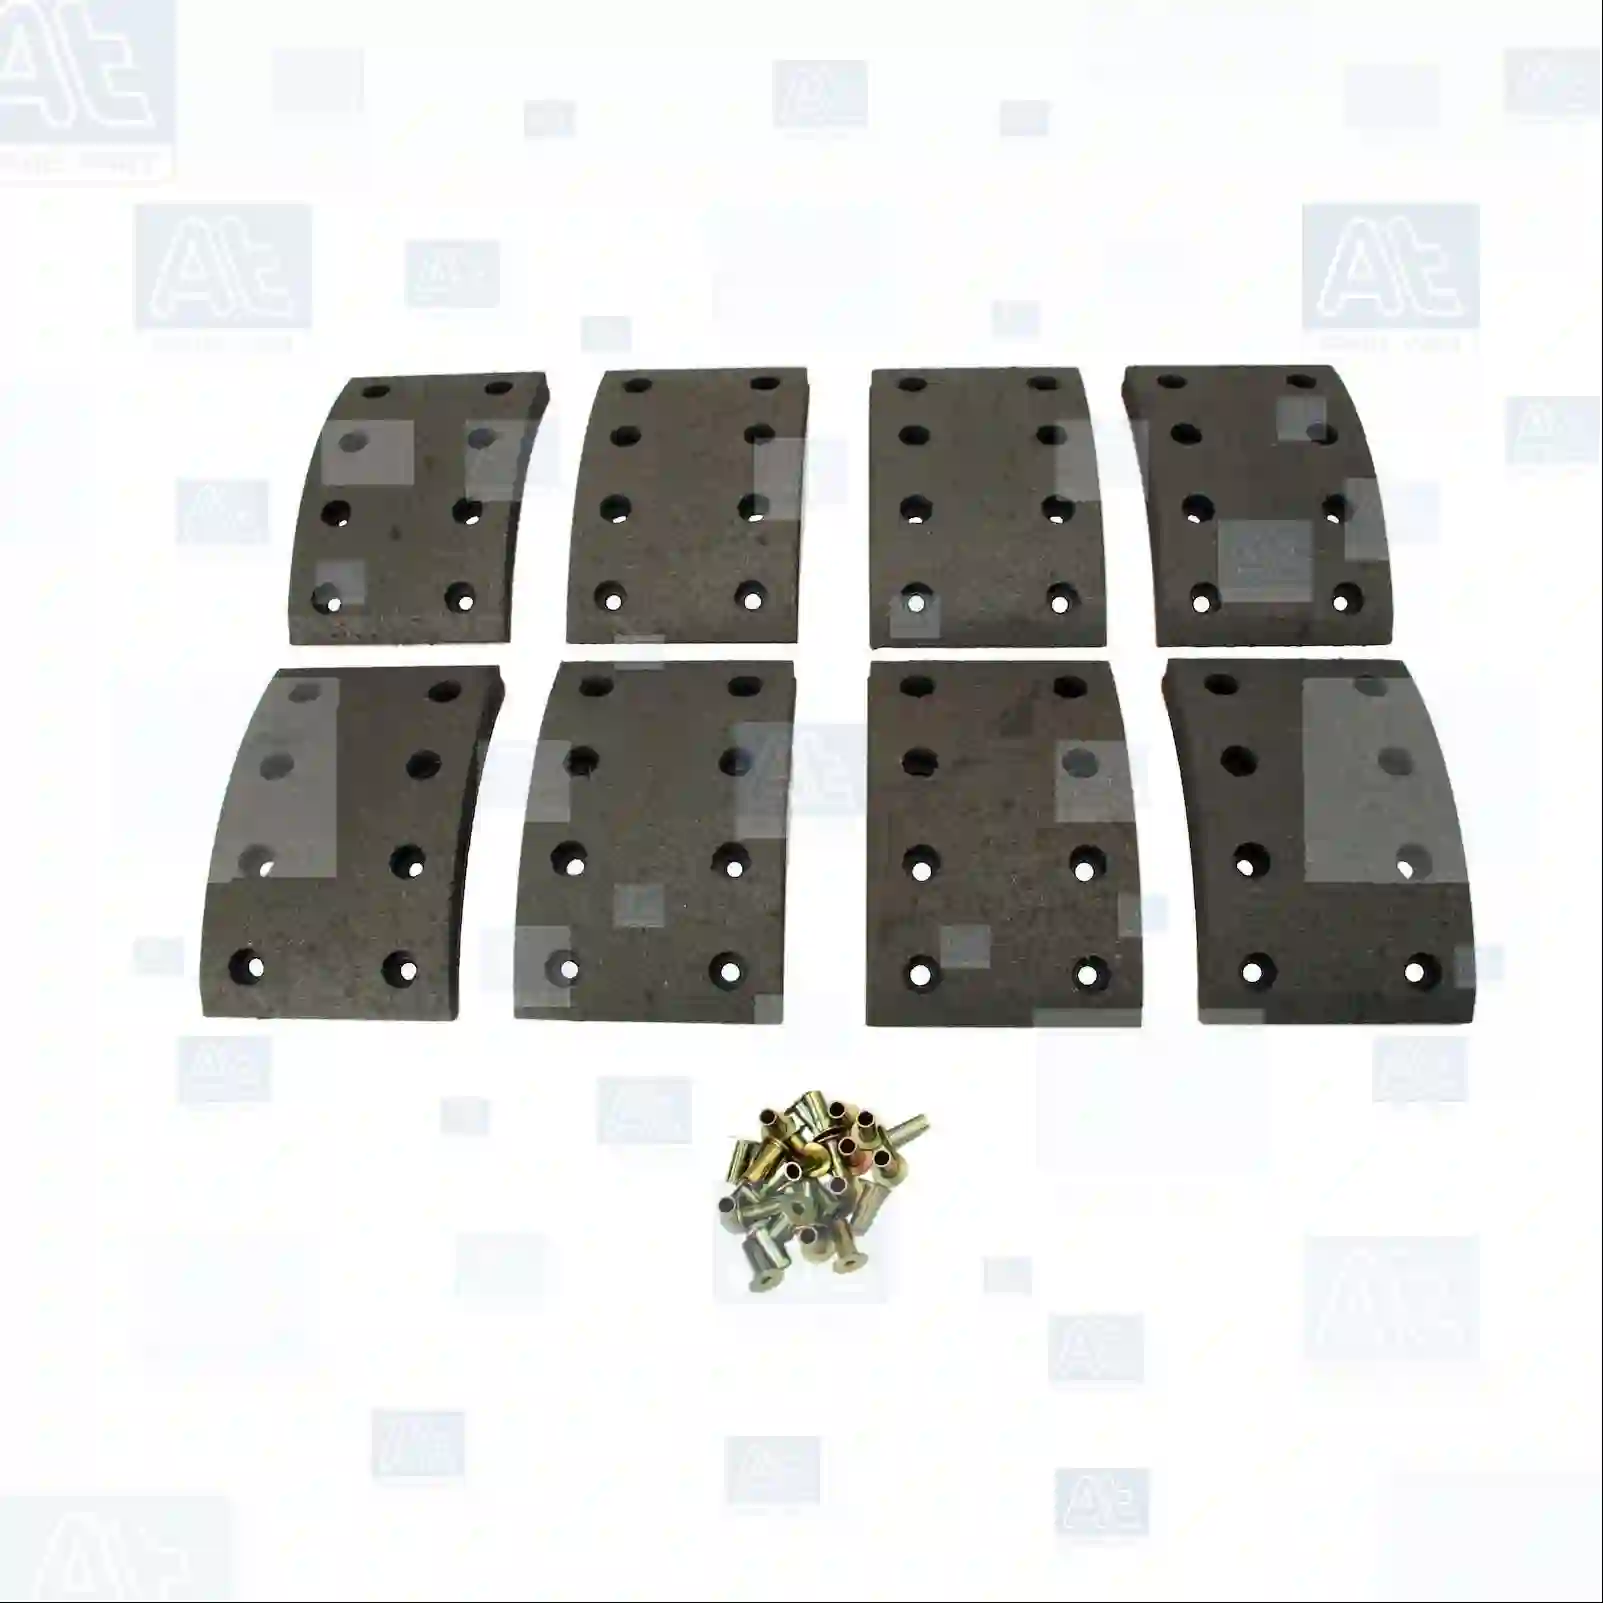 Drum brake lining kit, axle kit - oversize, at no 77715717, oem no: 81502200410, 81502200532, 81502200538, 81502200560, 81502200562, 81502200923, 81502210048, 81502210049, 81502210050, 81502210314, 81502210698, 81502210730, 3524210010, 3524210310, 3524210410, 3524210610, 3524210810, 3534210810, 3534230610, 3534231210, 3534231310, 3604232410, 3814210010, 3814210110, 3814210210, 3814230010, 3814230310, 3814230410, 3814230710, 3834210610, 3834210910, 3834211410, 3834211510, 3834211910, 3834212410, 3834212510, 3834212610, 6174211210, 6174211310, 6174211710, 6174230011, 6174232210, 6174232310, ZG50455-0008 At Spare Part | Engine, Accelerator Pedal, Camshaft, Connecting Rod, Crankcase, Crankshaft, Cylinder Head, Engine Suspension Mountings, Exhaust Manifold, Exhaust Gas Recirculation, Filter Kits, Flywheel Housing, General Overhaul Kits, Engine, Intake Manifold, Oil Cleaner, Oil Cooler, Oil Filter, Oil Pump, Oil Sump, Piston & Liner, Sensor & Switch, Timing Case, Turbocharger, Cooling System, Belt Tensioner, Coolant Filter, Coolant Pipe, Corrosion Prevention Agent, Drive, Expansion Tank, Fan, Intercooler, Monitors & Gauges, Radiator, Thermostat, V-Belt / Timing belt, Water Pump, Fuel System, Electronical Injector Unit, Feed Pump, Fuel Filter, cpl., Fuel Gauge Sender,  Fuel Line, Fuel Pump, Fuel Tank, Injection Line Kit, Injection Pump, Exhaust System, Clutch & Pedal, Gearbox, Propeller Shaft, Axles, Brake System, Hubs & Wheels, Suspension, Leaf Spring, Universal Parts / Accessories, Steering, Electrical System, Cabin Drum brake lining kit, axle kit - oversize, at no 77715717, oem no: 81502200410, 81502200532, 81502200538, 81502200560, 81502200562, 81502200923, 81502210048, 81502210049, 81502210050, 81502210314, 81502210698, 81502210730, 3524210010, 3524210310, 3524210410, 3524210610, 3524210810, 3534210810, 3534230610, 3534231210, 3534231310, 3604232410, 3814210010, 3814210110, 3814210210, 3814230010, 3814230310, 3814230410, 3814230710, 3834210610, 3834210910, 3834211410, 3834211510, 3834211910, 3834212410, 3834212510, 3834212610, 6174211210, 6174211310, 6174211710, 6174230011, 6174232210, 6174232310, ZG50455-0008 At Spare Part | Engine, Accelerator Pedal, Camshaft, Connecting Rod, Crankcase, Crankshaft, Cylinder Head, Engine Suspension Mountings, Exhaust Manifold, Exhaust Gas Recirculation, Filter Kits, Flywheel Housing, General Overhaul Kits, Engine, Intake Manifold, Oil Cleaner, Oil Cooler, Oil Filter, Oil Pump, Oil Sump, Piston & Liner, Sensor & Switch, Timing Case, Turbocharger, Cooling System, Belt Tensioner, Coolant Filter, Coolant Pipe, Corrosion Prevention Agent, Drive, Expansion Tank, Fan, Intercooler, Monitors & Gauges, Radiator, Thermostat, V-Belt / Timing belt, Water Pump, Fuel System, Electronical Injector Unit, Feed Pump, Fuel Filter, cpl., Fuel Gauge Sender,  Fuel Line, Fuel Pump, Fuel Tank, Injection Line Kit, Injection Pump, Exhaust System, Clutch & Pedal, Gearbox, Propeller Shaft, Axles, Brake System, Hubs & Wheels, Suspension, Leaf Spring, Universal Parts / Accessories, Steering, Electrical System, Cabin